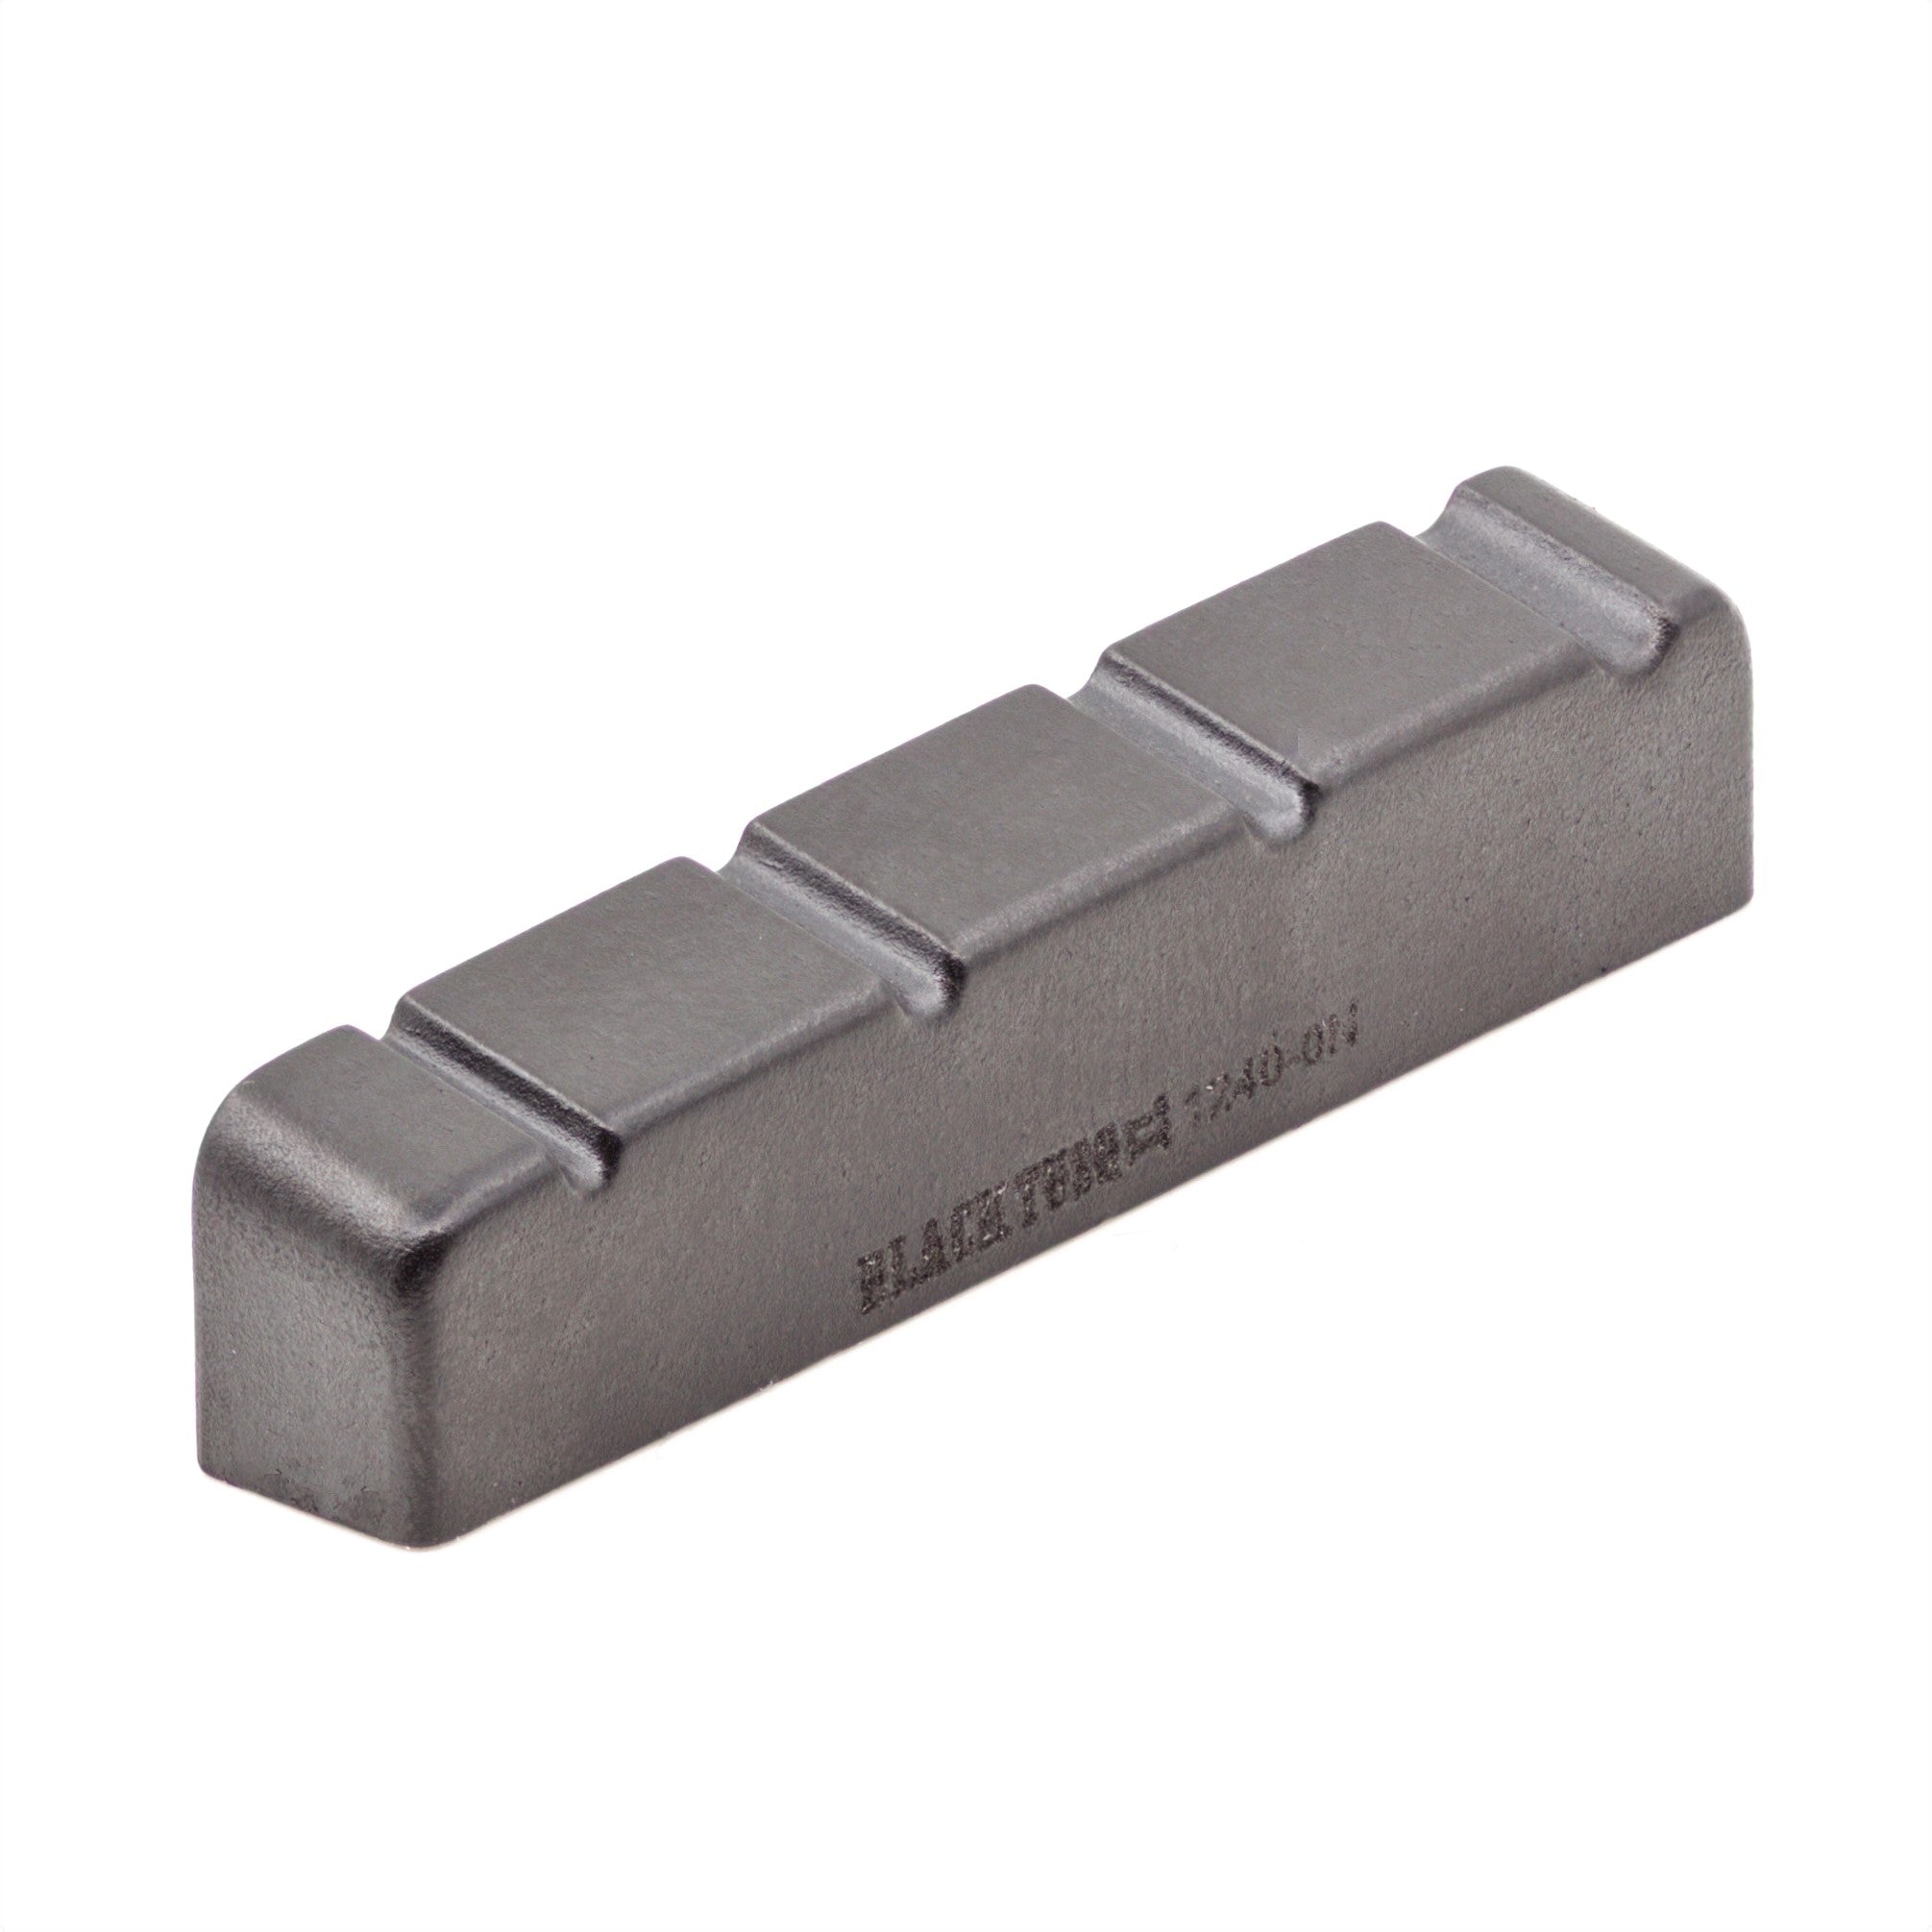 Model 1240-00 Nut Slotted L39.92mm